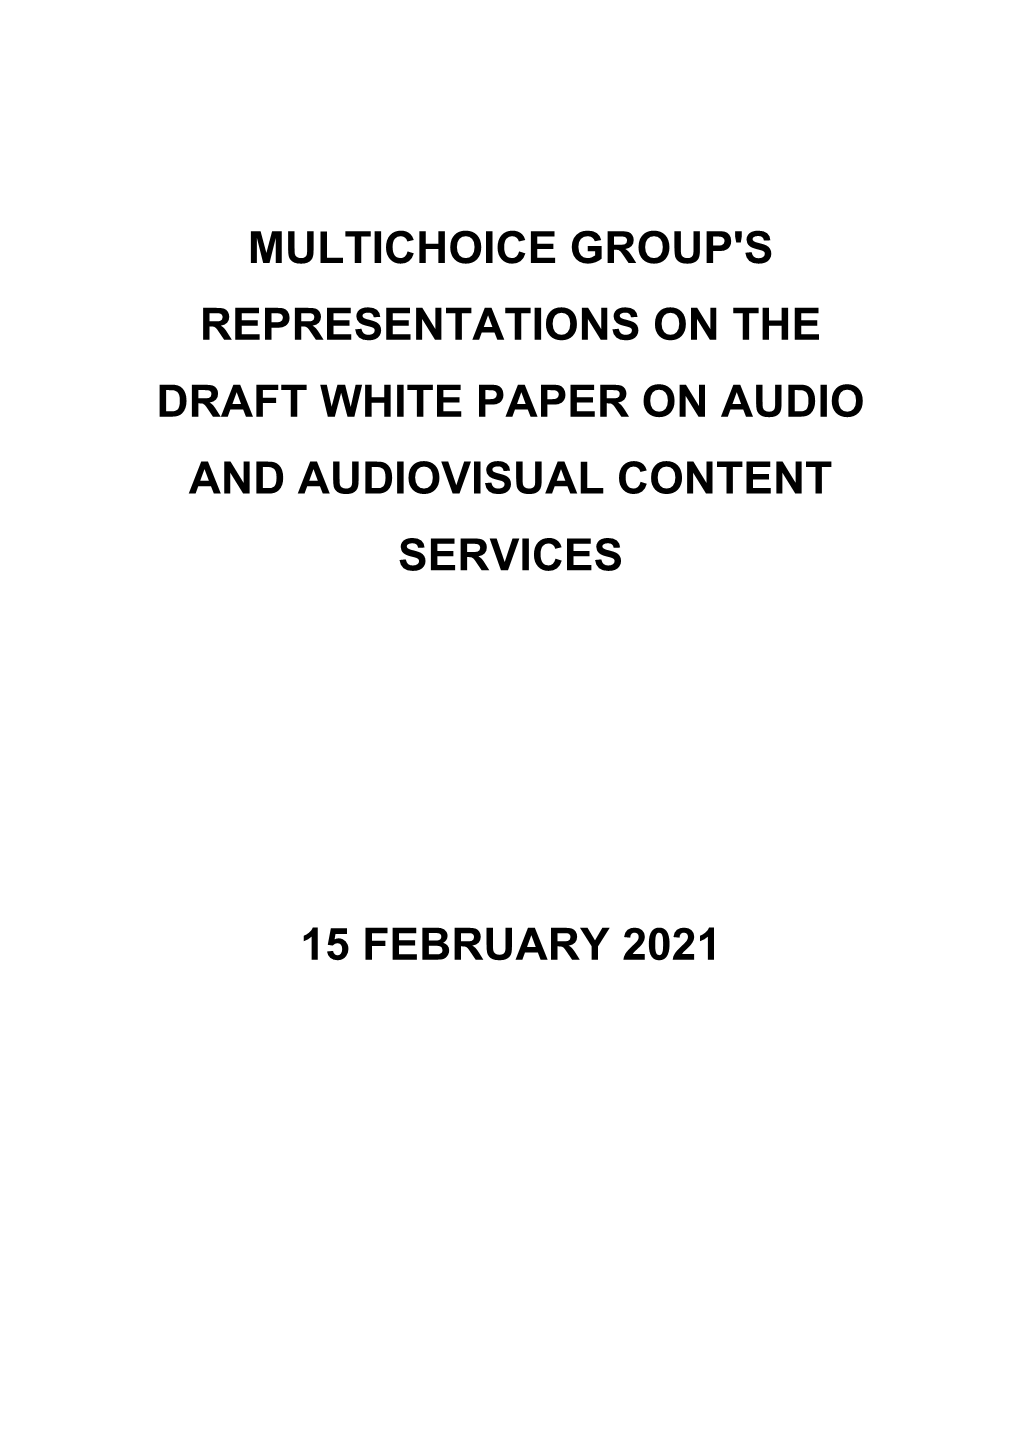 White Paper Response Multichoice 15 Feb 2021 FINAL SUBMITTED 1.Pdf